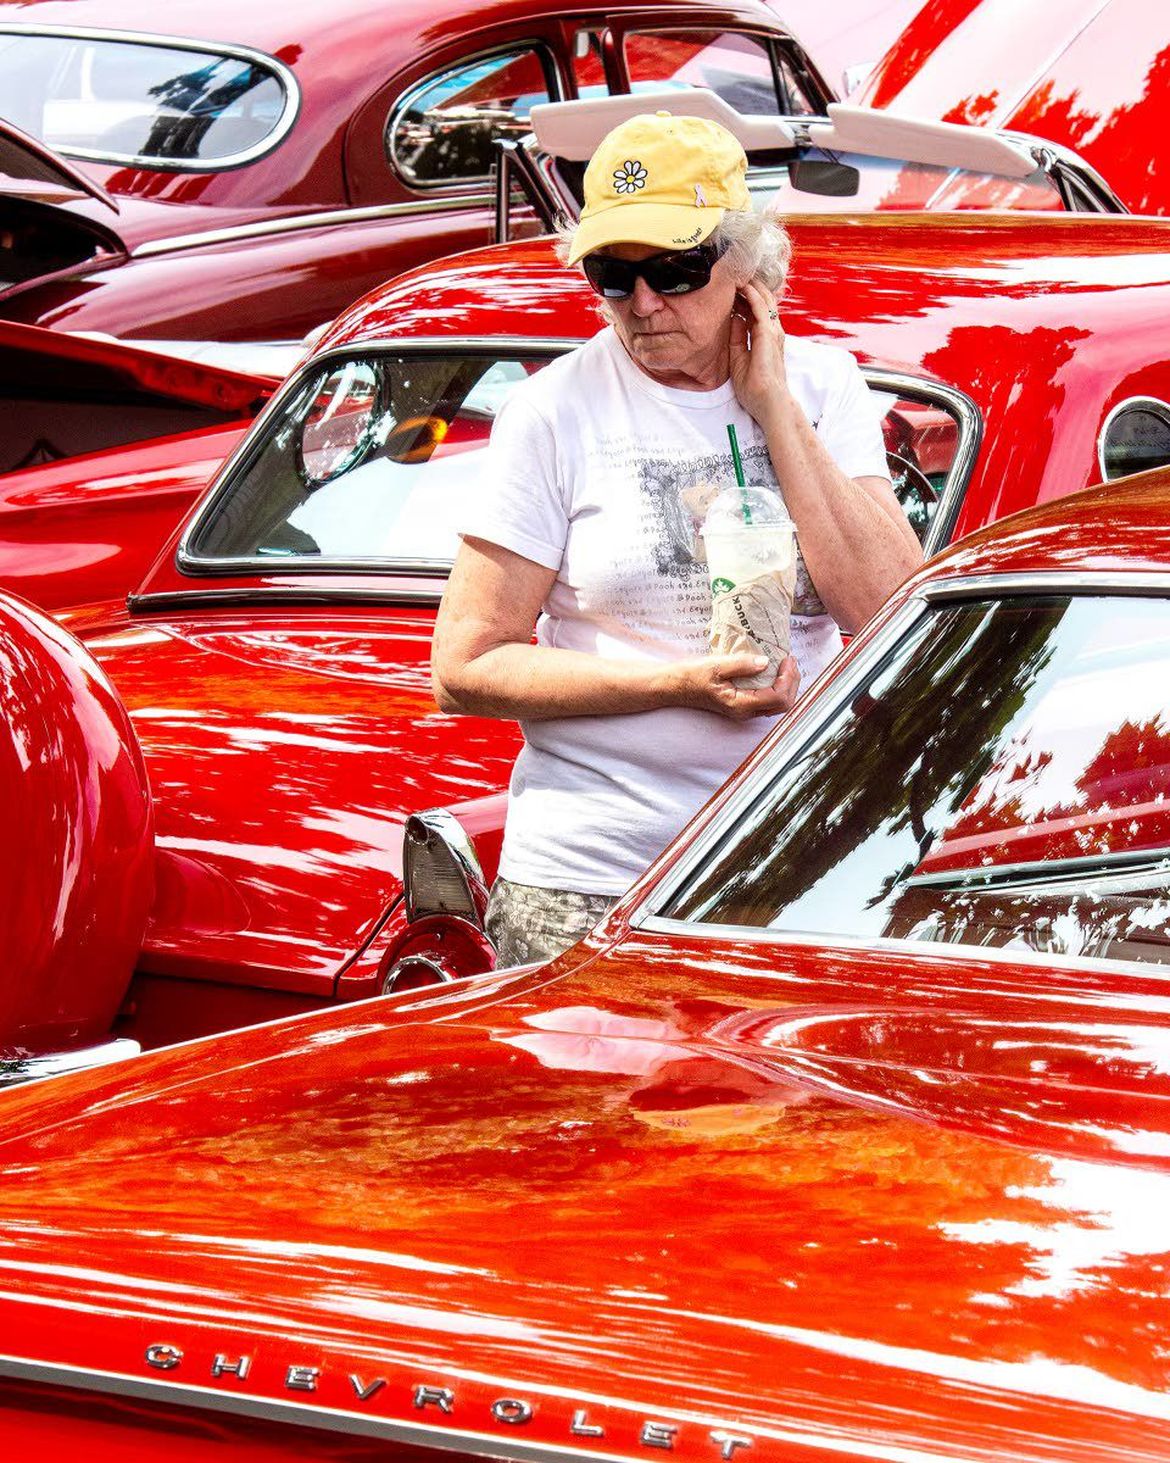 Lewiston’s annual Hot August Nights Show and Shine offers plenty of